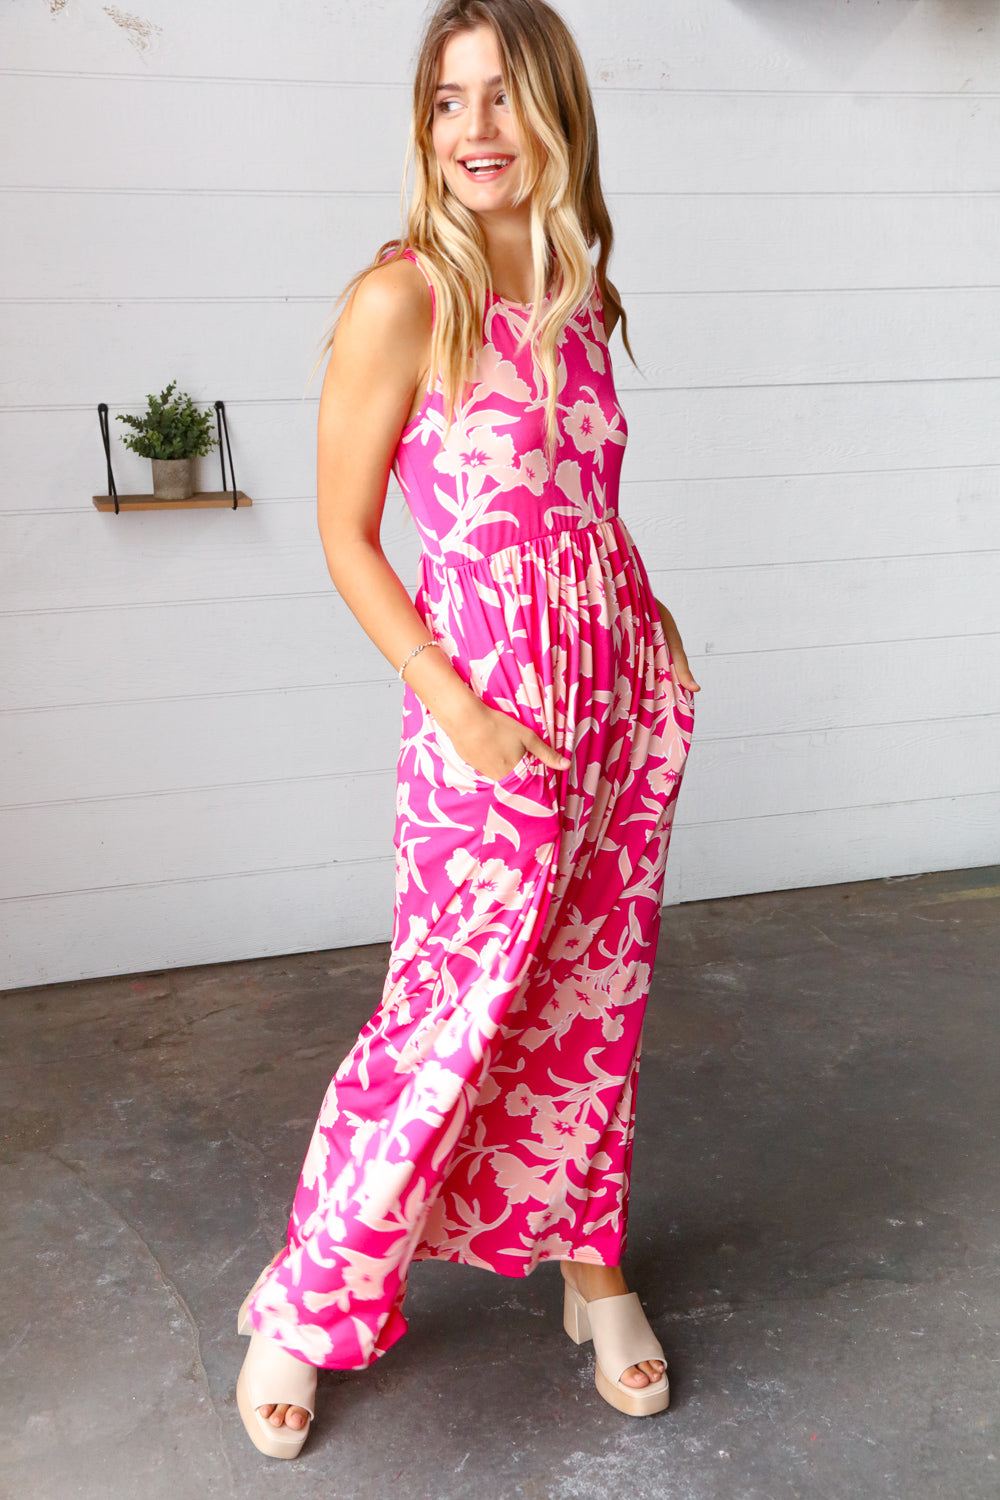 Pink Floral Print Fit and Flare Sleeveless Maxi Dress